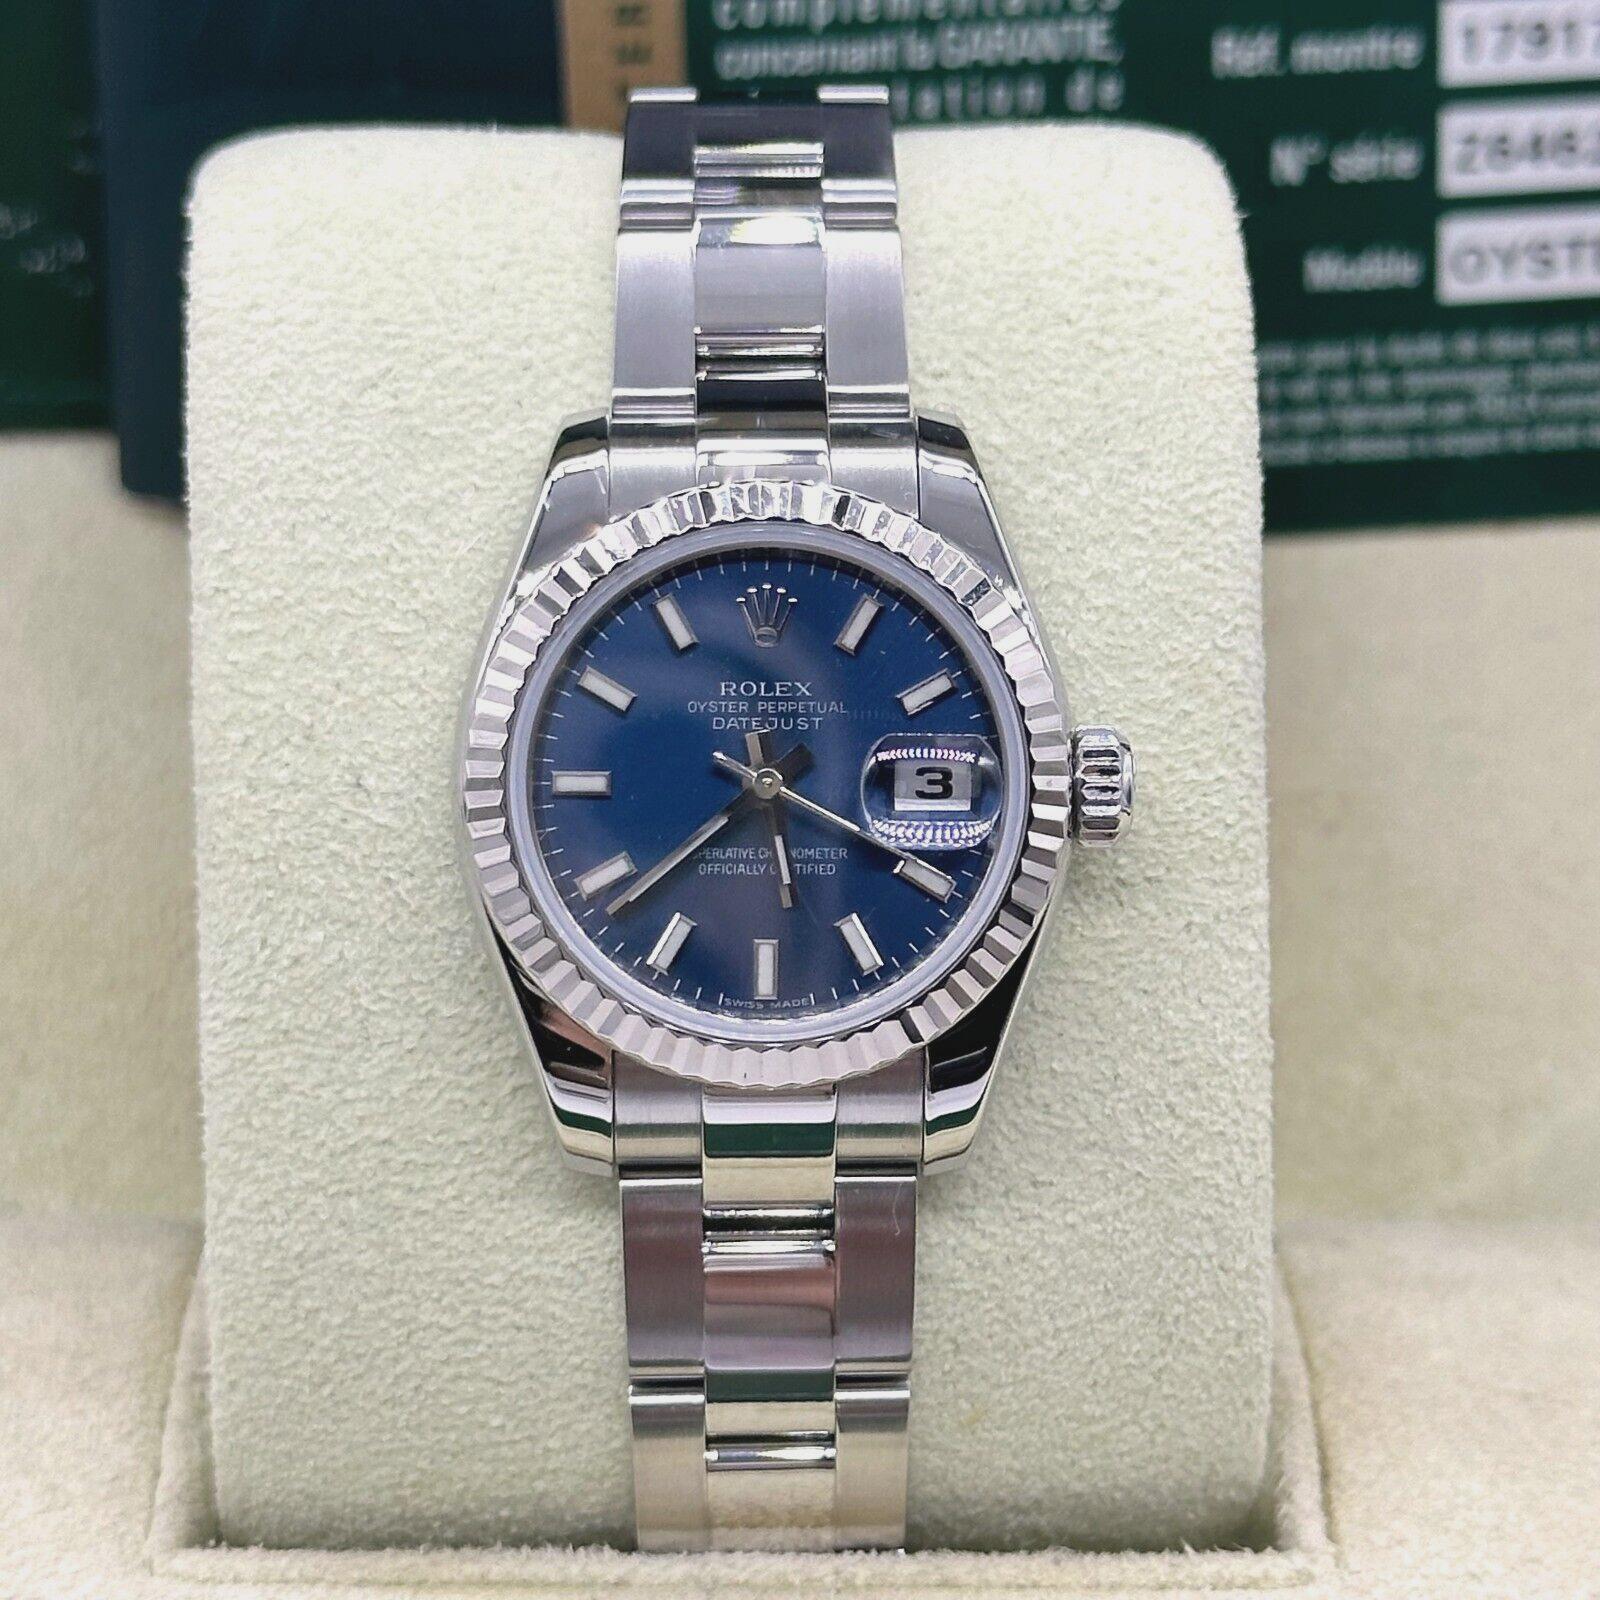 Style Number: 179174
Serial: Z646***
Year: 2010
Model: Ladies Datejust 
Case Material: Stainless Steel 
Band: Stainless Steel 
Bezel: 18K White Gold 
Dial: Blue 
Face: Sapphire Crystal 
Case Size: 26mm  

Includes: 

-Rolex Box & Paper

-Certified